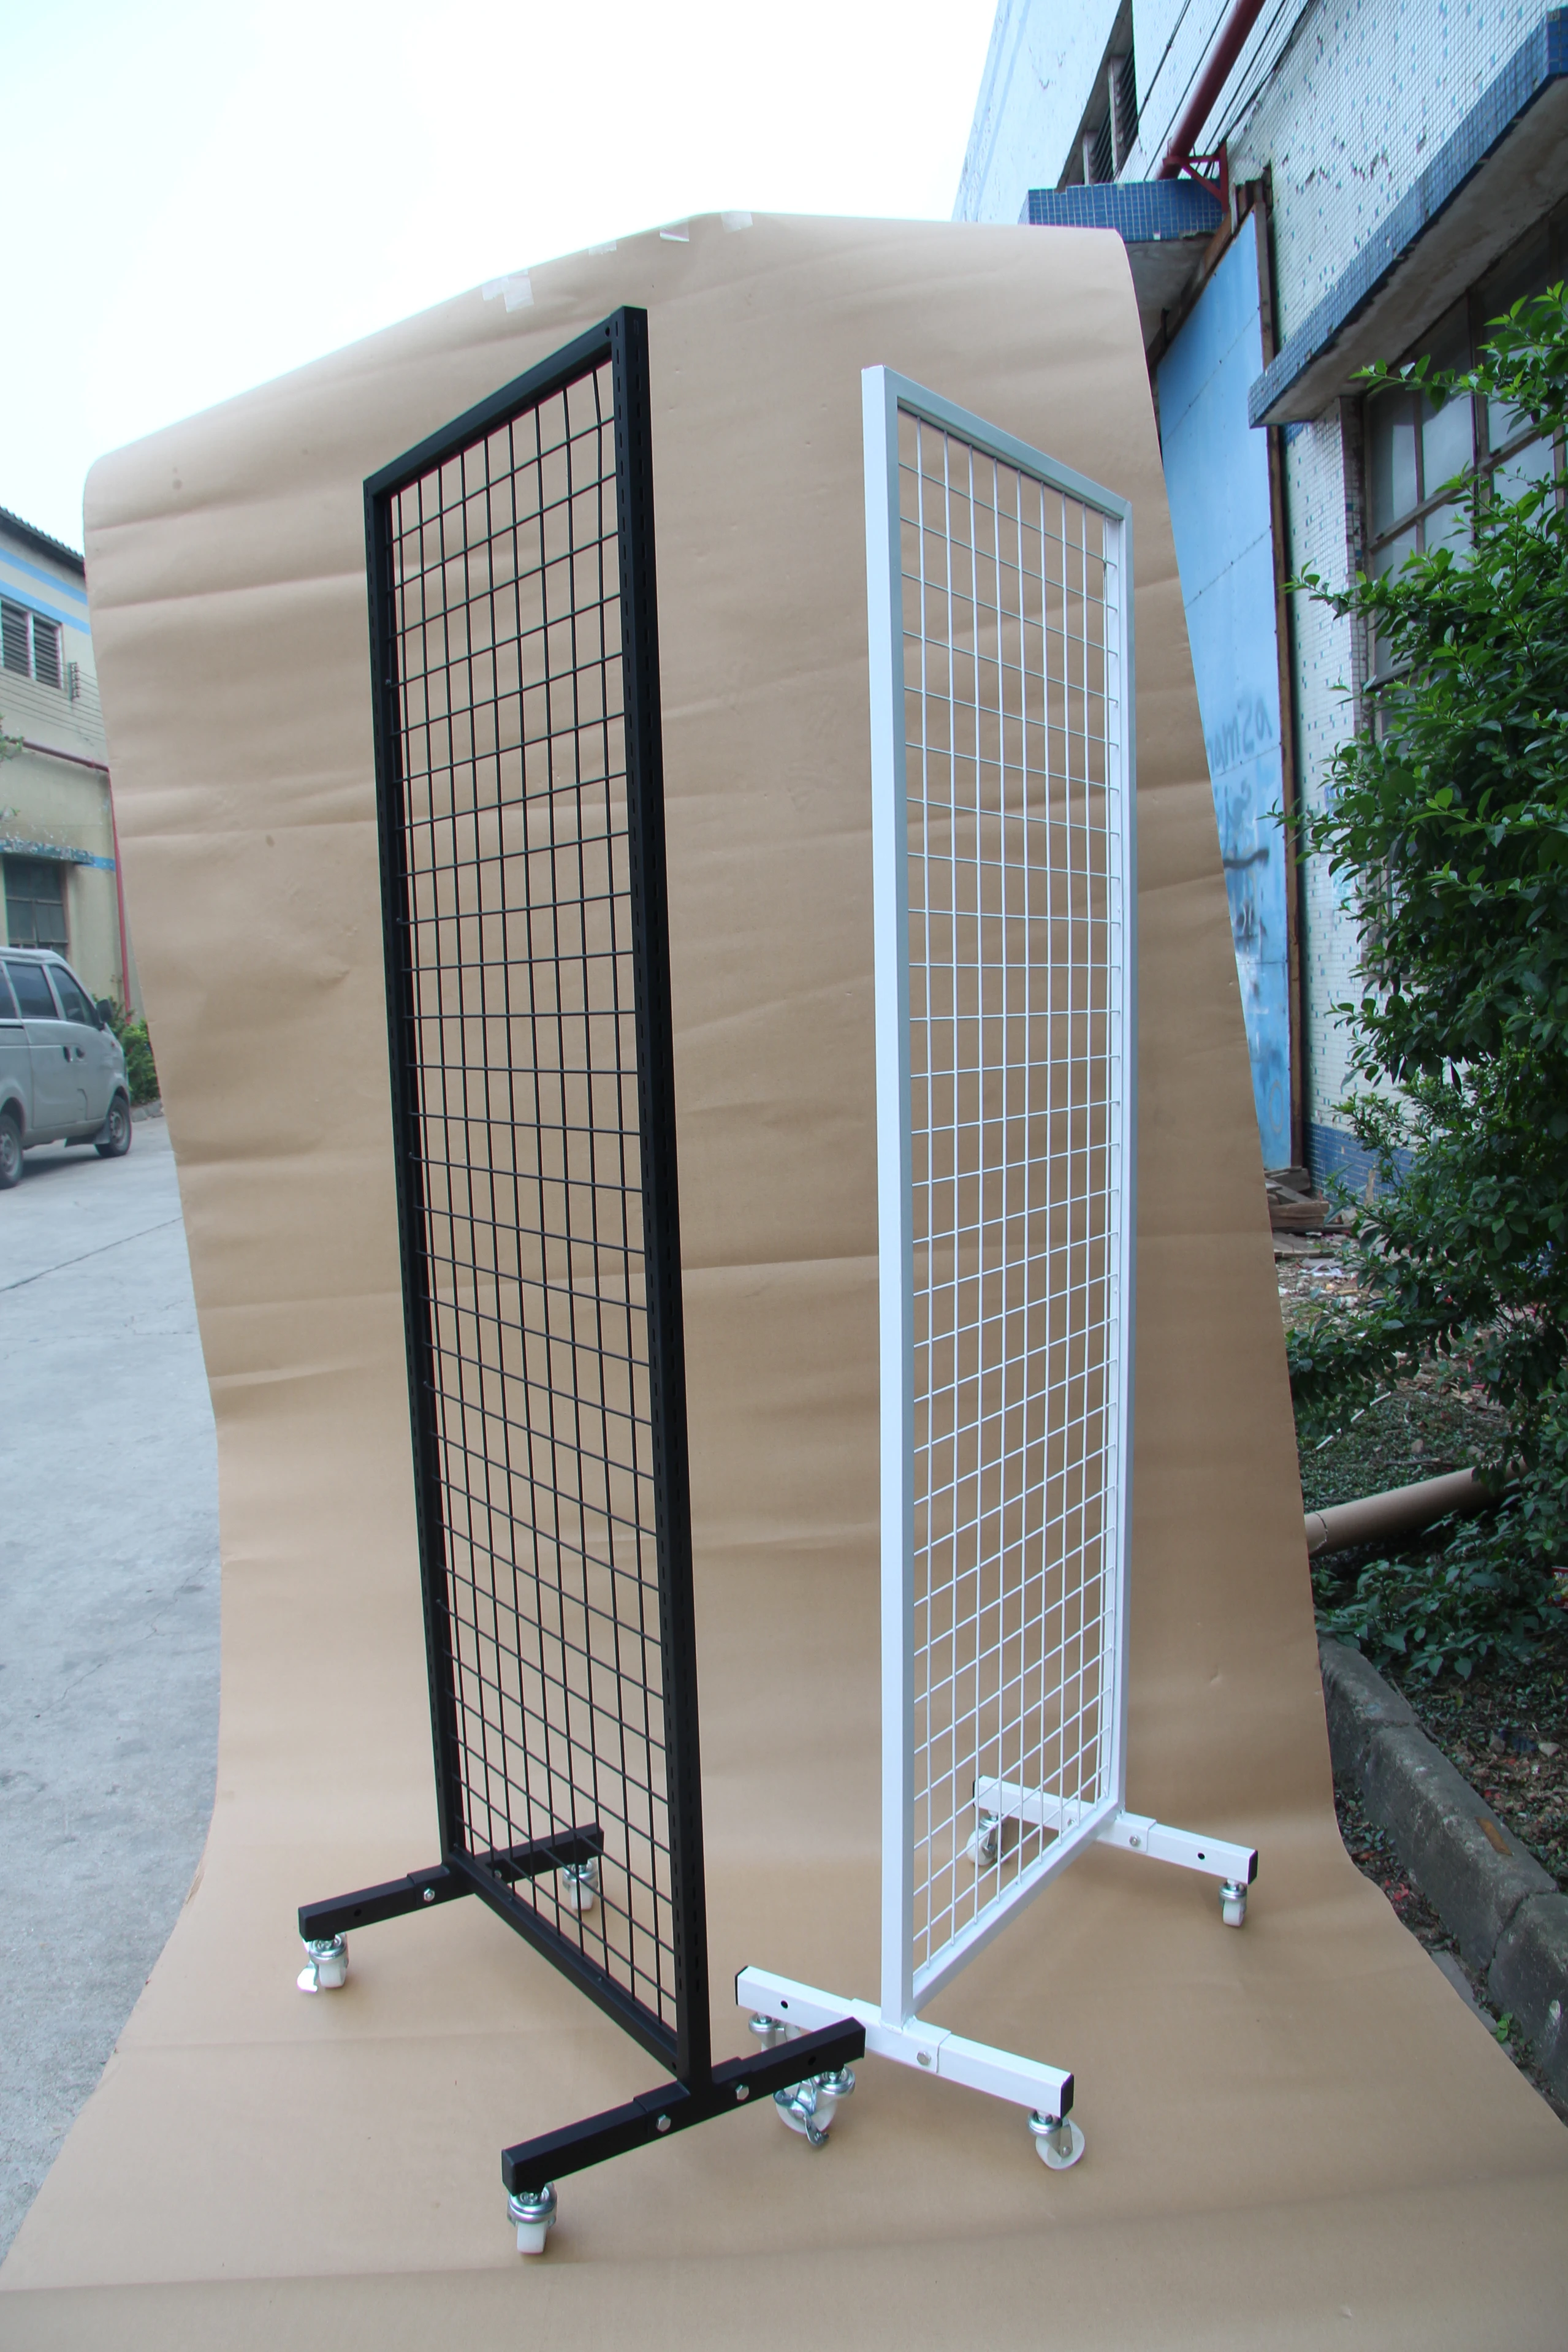 Store retail wire grid rack Floor display racks stand for Hanging display products